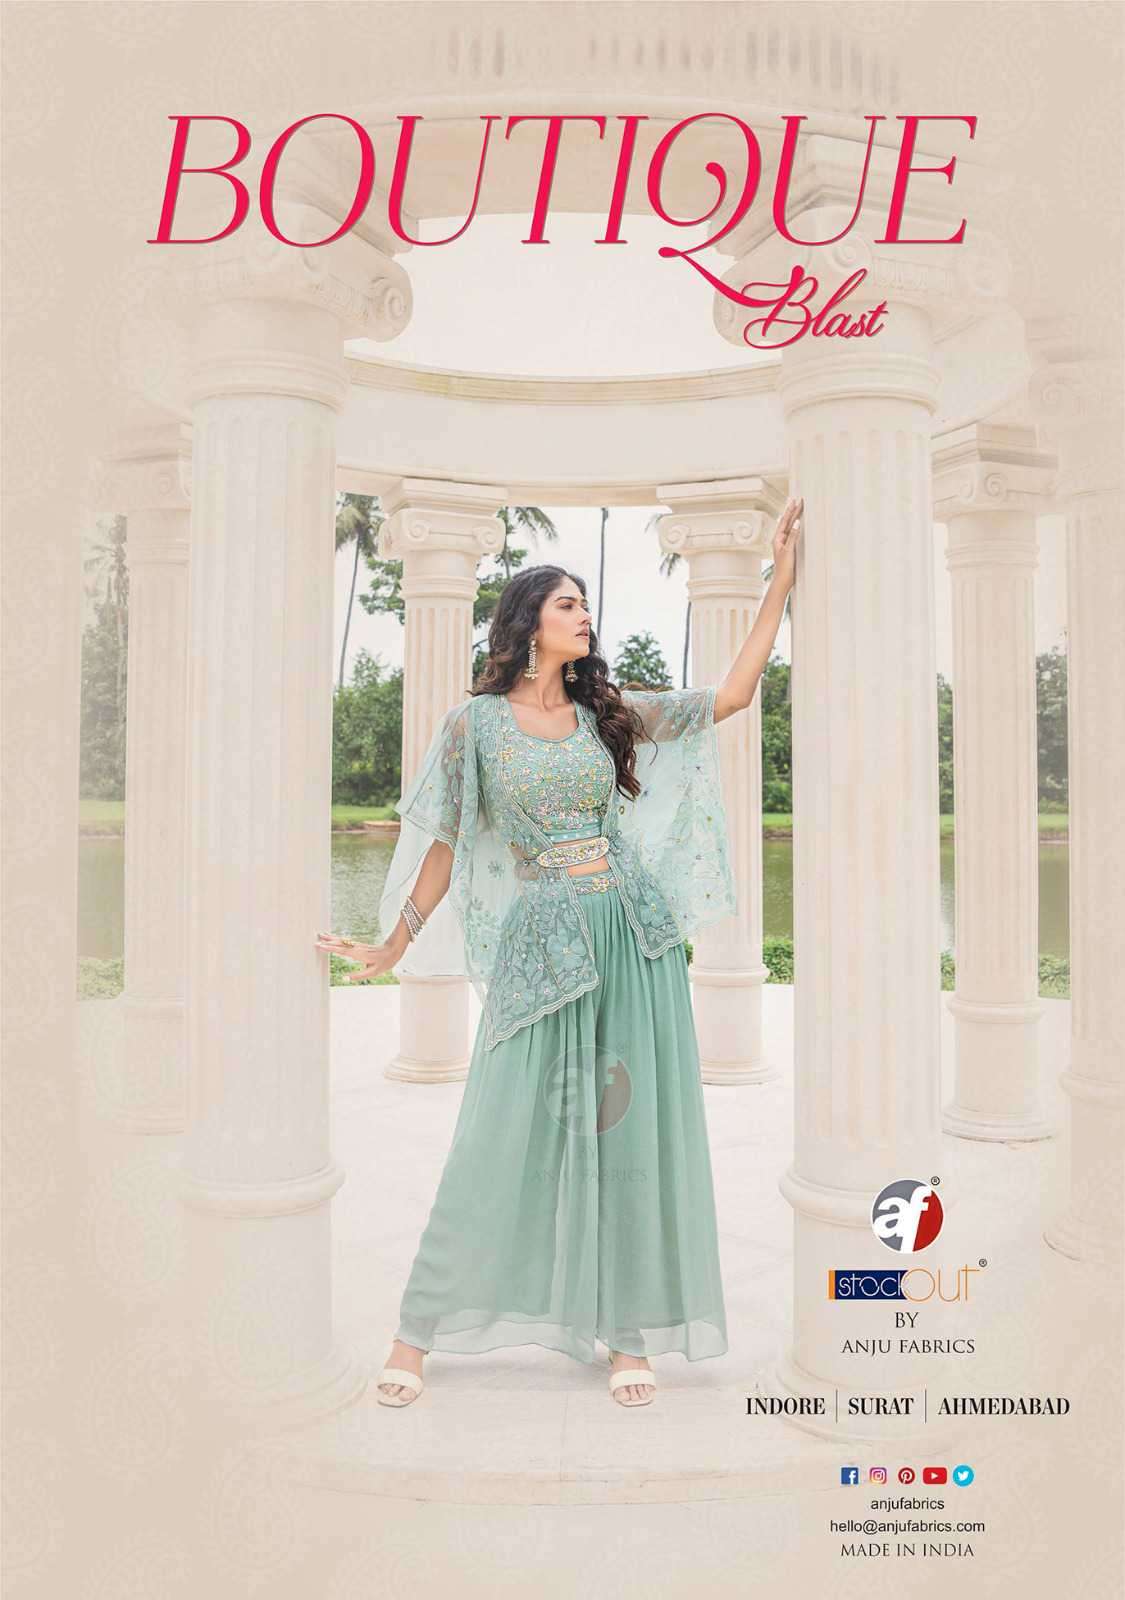 Af Stock Out Boutique Blast By Anju Fabrics Designer Cocktail Outfit Partywear Collection